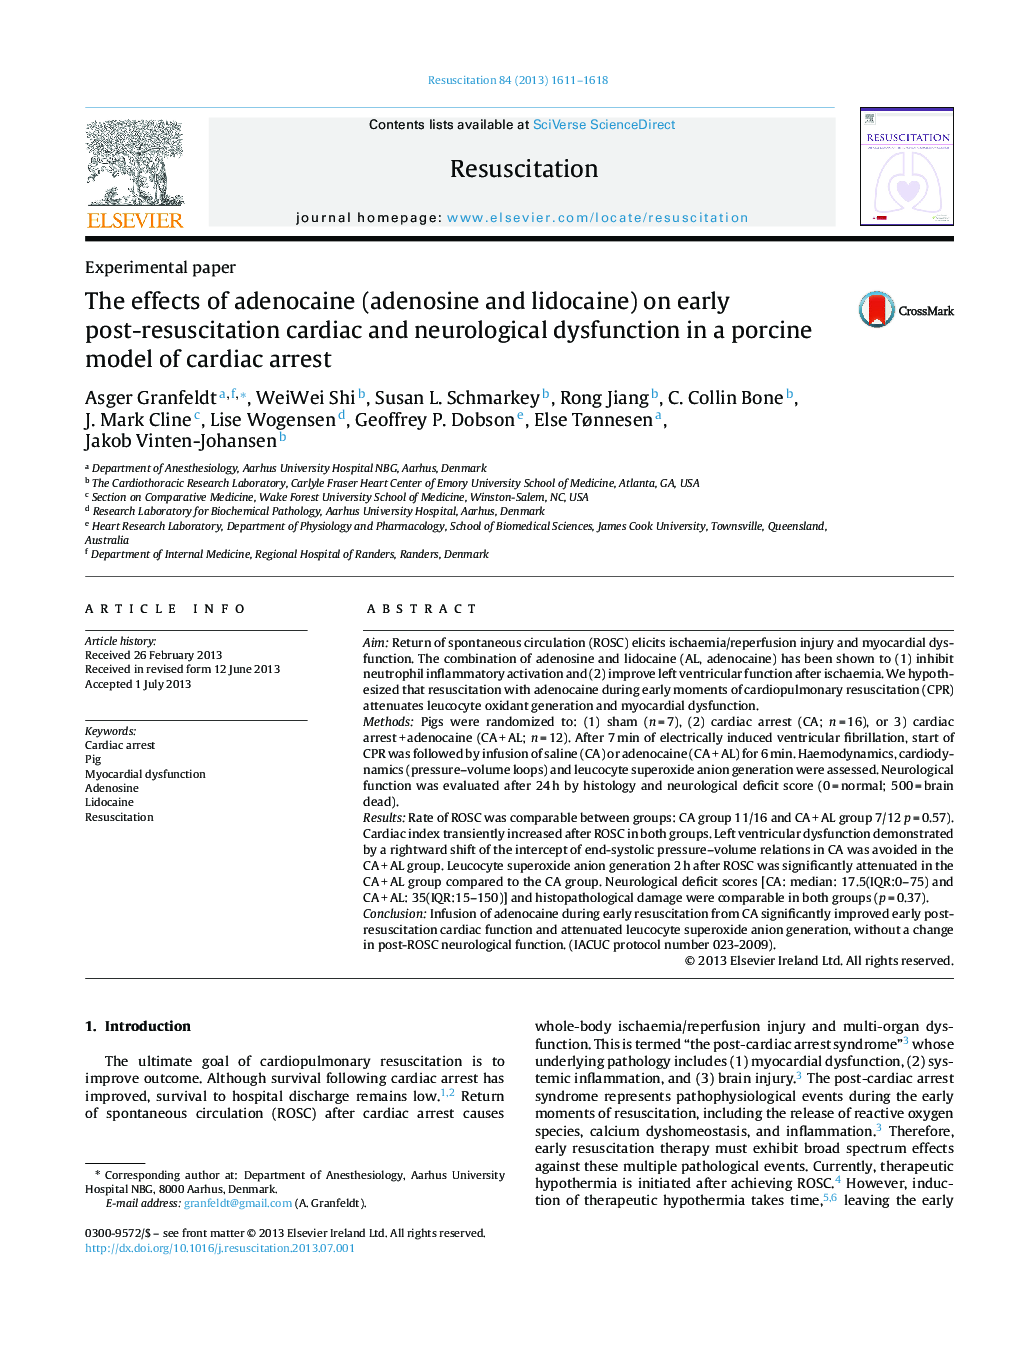 The effects of adenocaine (adenosine and lidocaine) on early post-resuscitation cardiac and neurological dysfunction in a porcine model of cardiac arrest